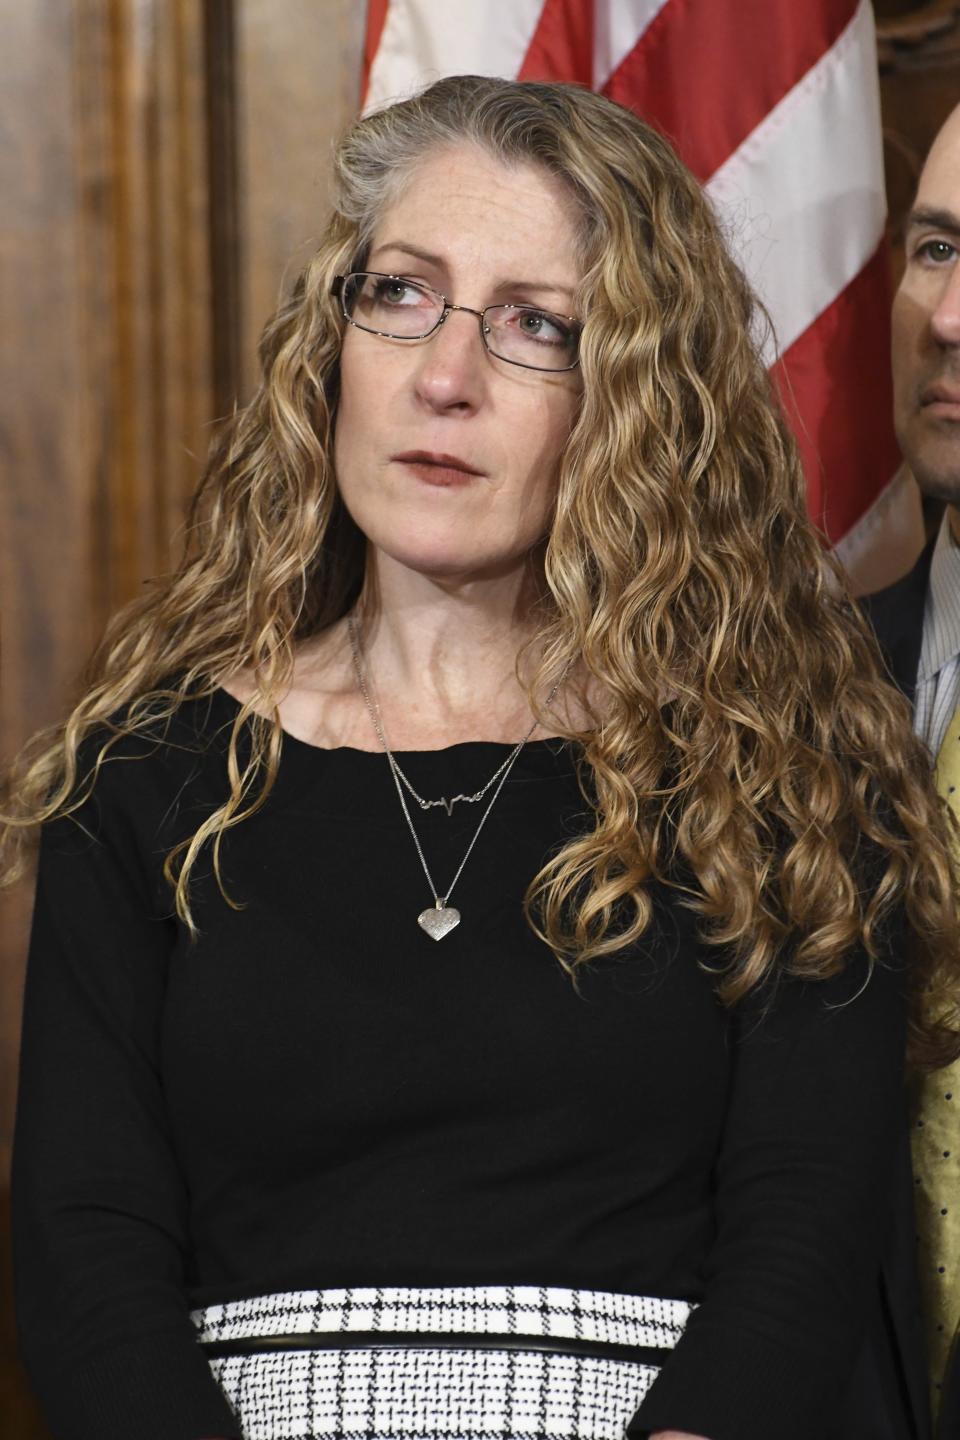 Evelyn Piazza listens to Gov. Tom Wolf of Pennsylvania speaking at a news conference in his Capitol reception room Friday, Oct. 19, 2018 in Harrisburg, Pa., before he signs anti-hazing legislation inspired by her son, Penn State student Tim Piazza, who died after a night of drinking in a fraternity house. (AP Photo/Marc Levy)